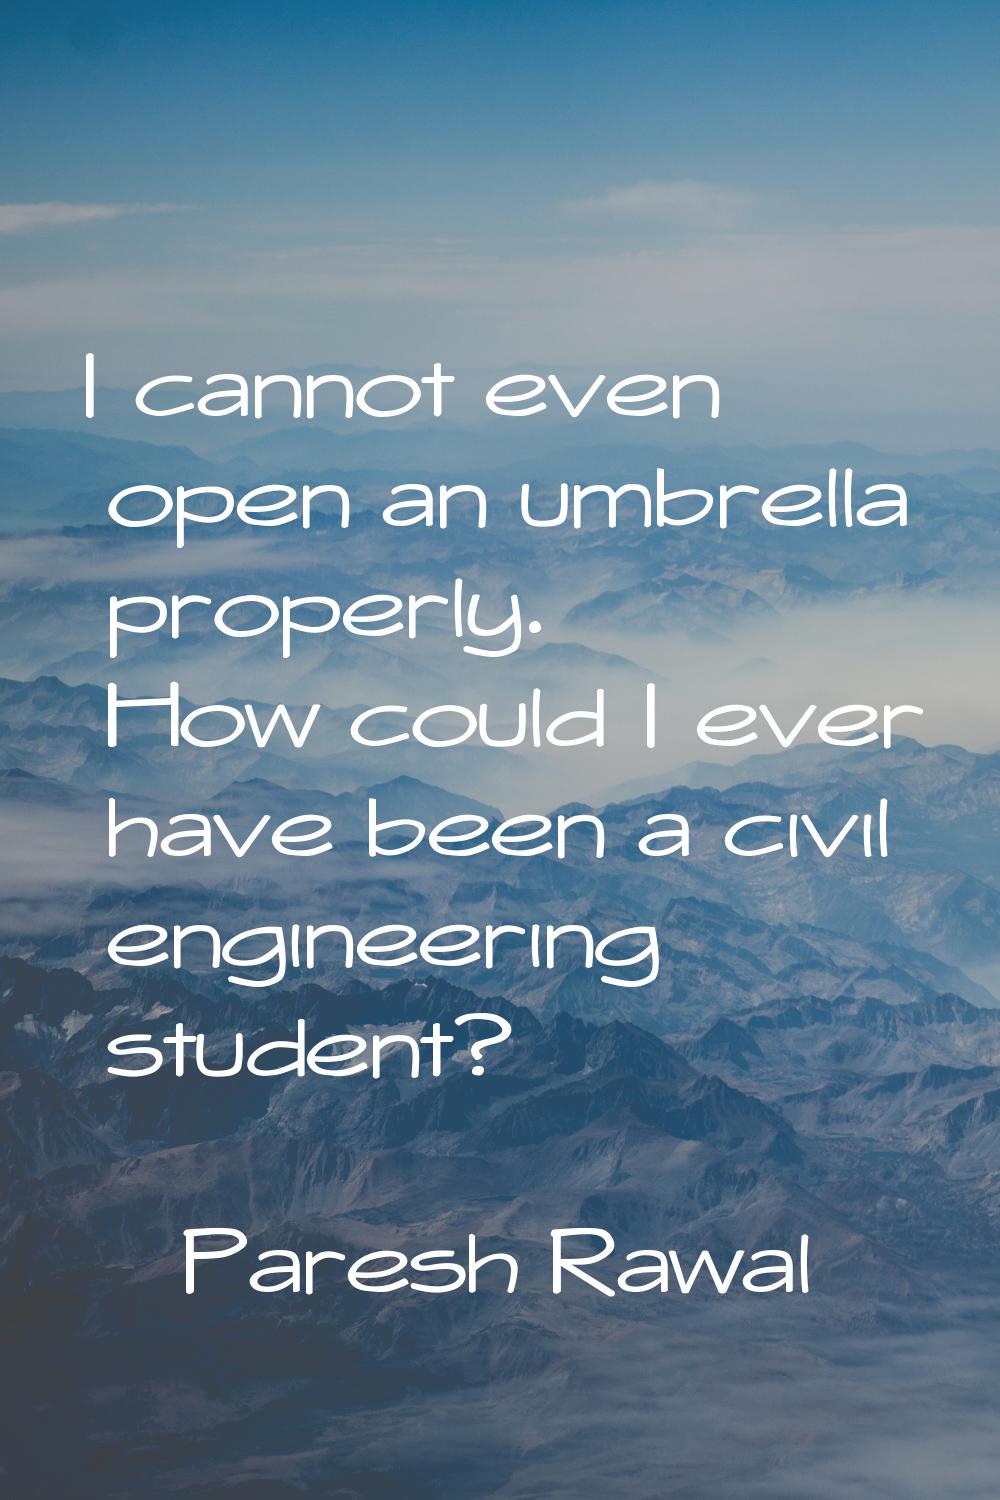 I cannot even open an umbrella properly. How could I ever have been a civil engineering student?